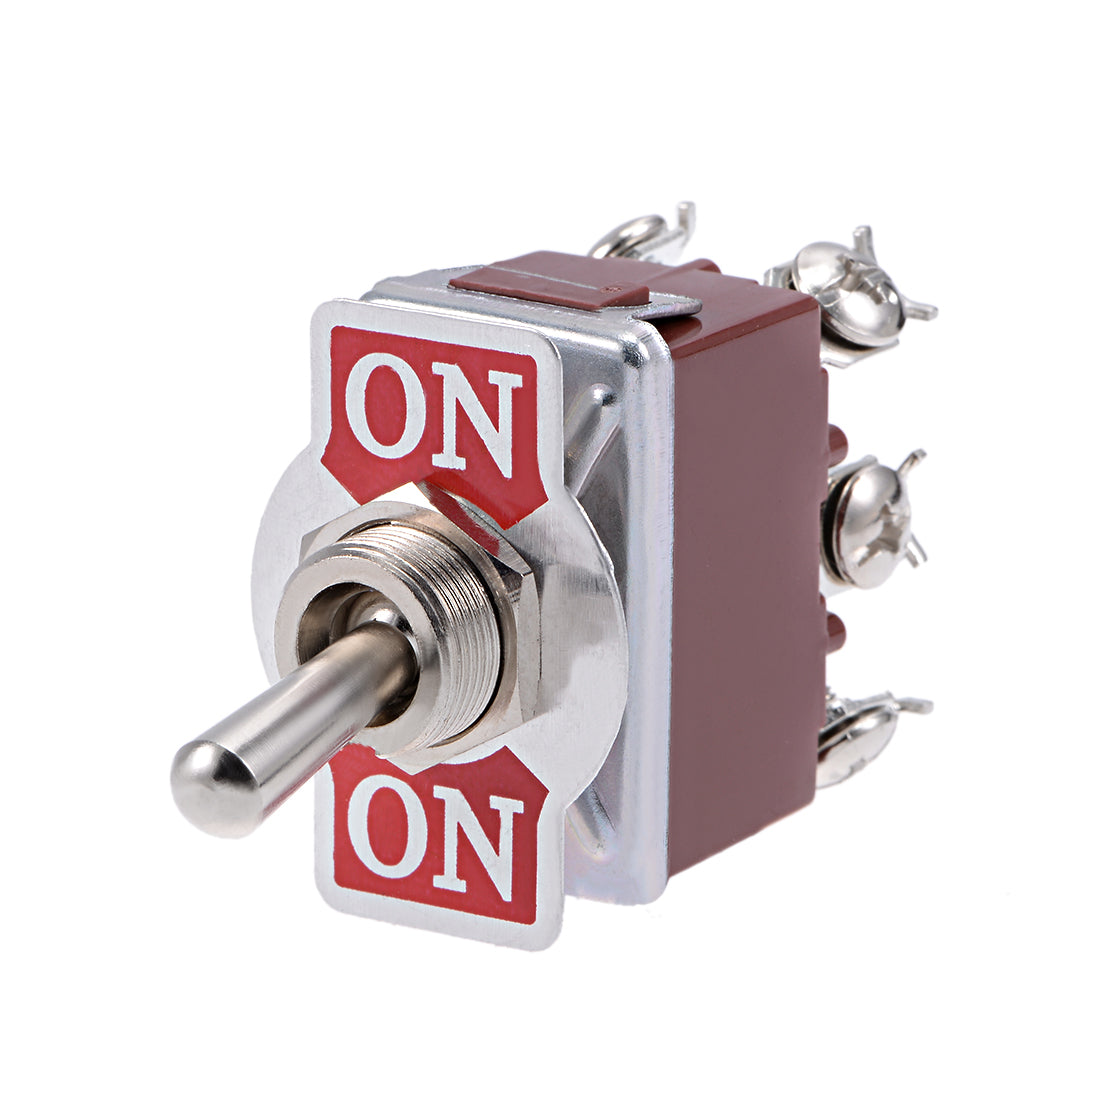 uxcell Uxcell DPDT Momentary Rocker Toggle Switch Heavy-Duty 15A 250V 6P ON/ON Metal Bat 1pcs